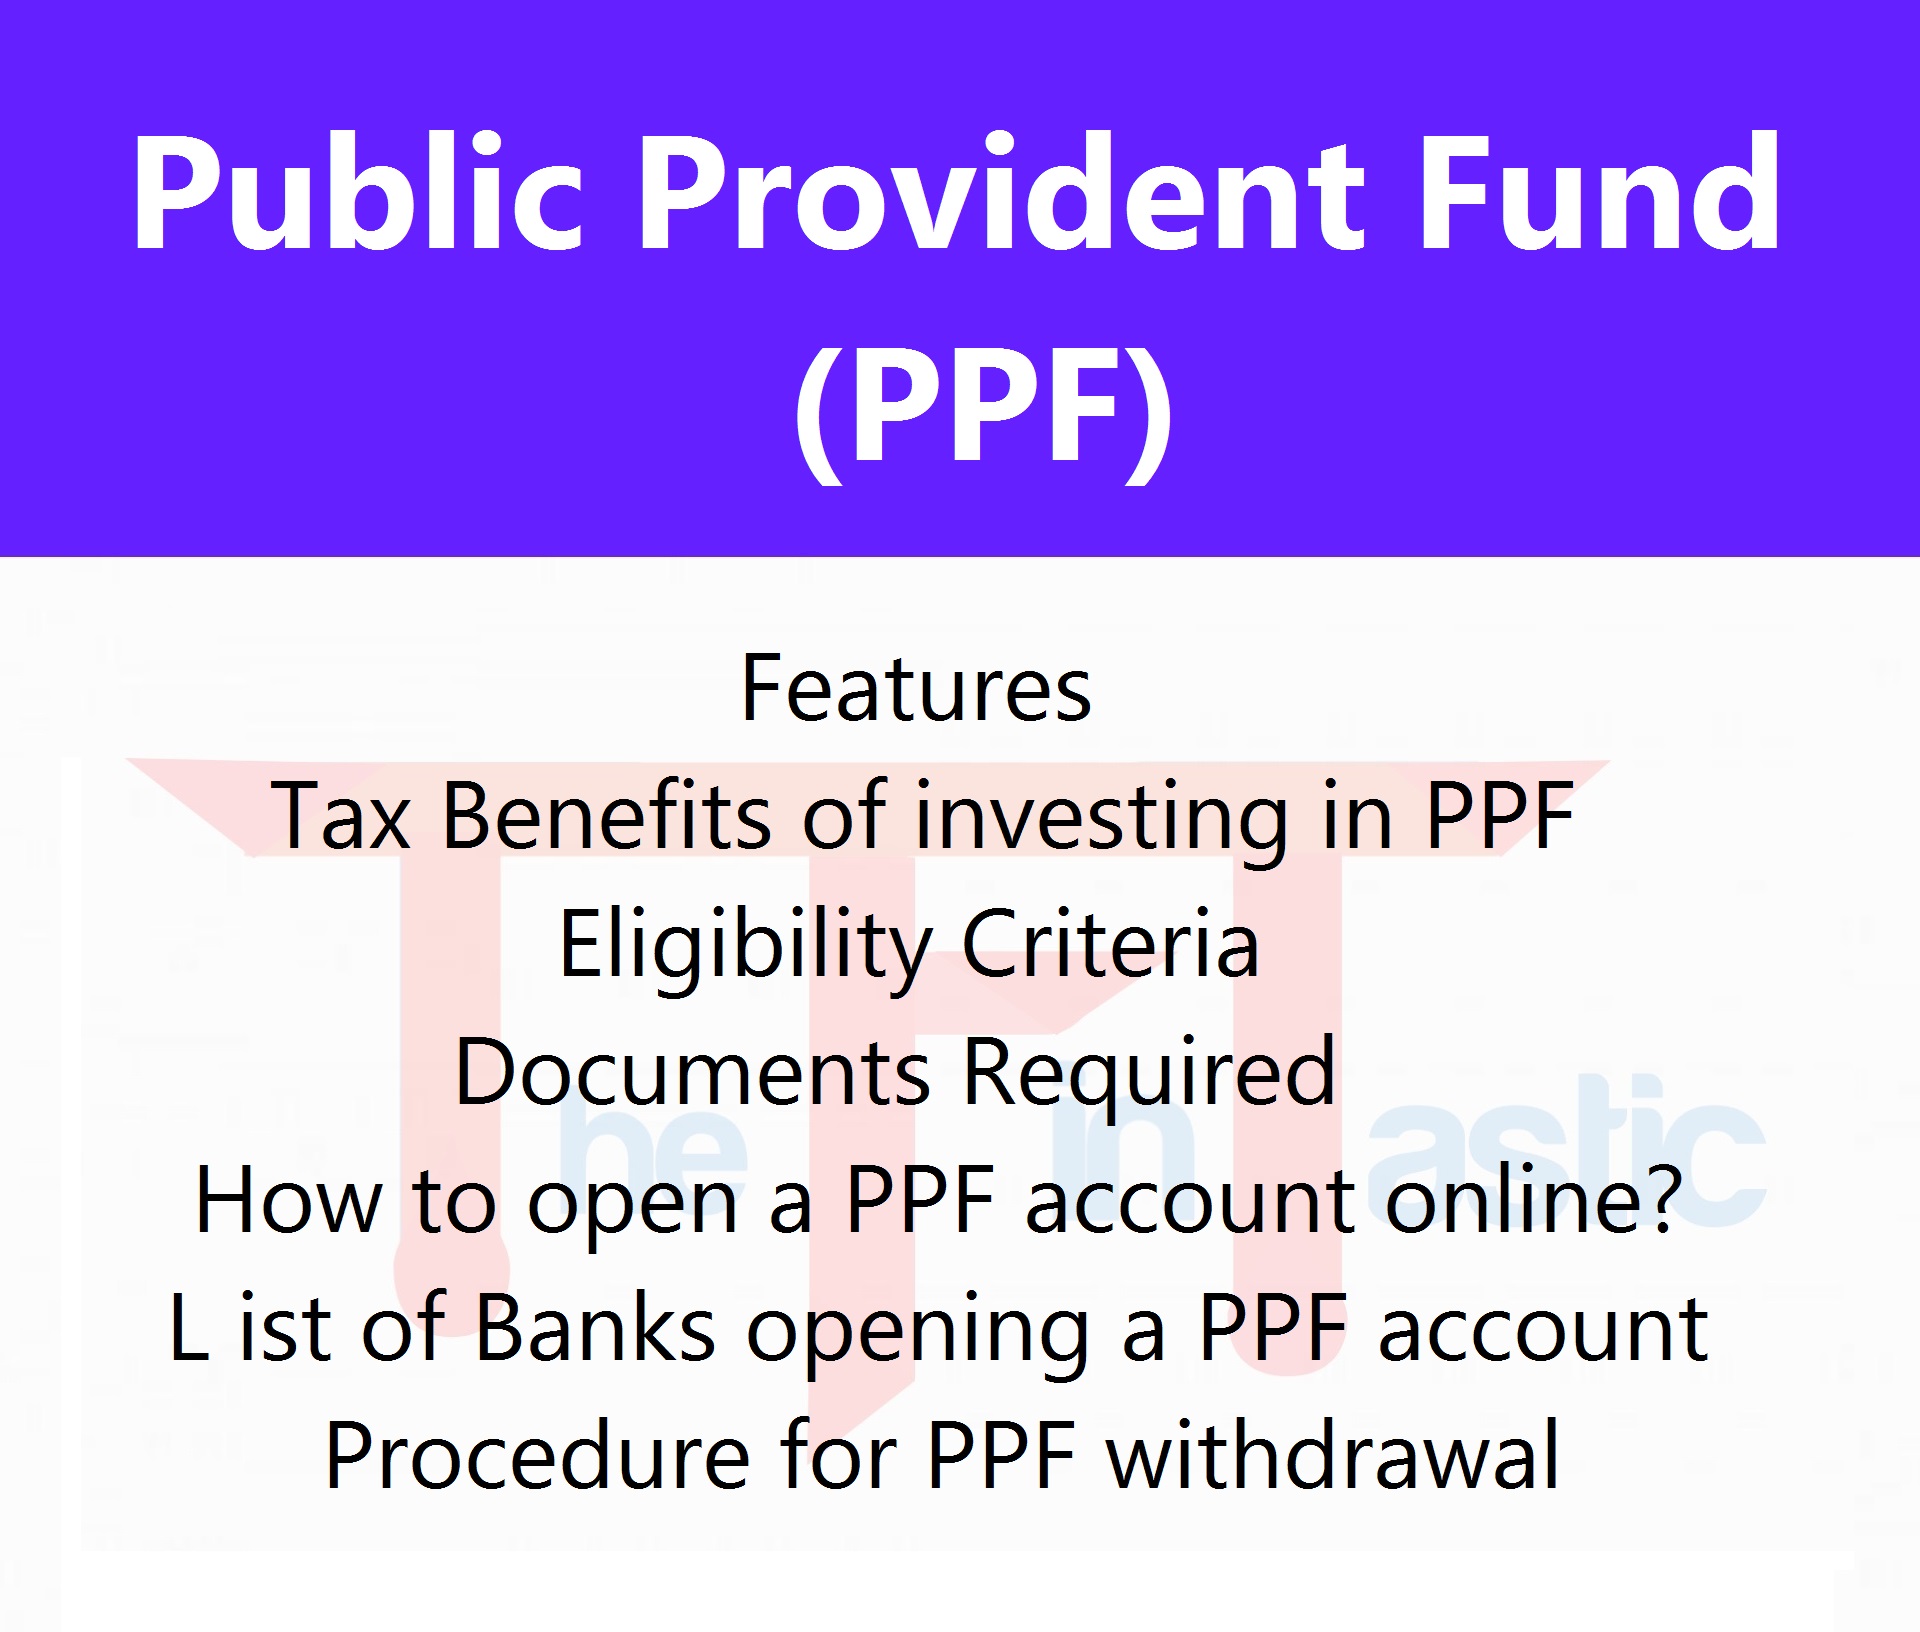 Public Provident Fund (PPF) - Tax Benefits, Features and Procedure of Account opening